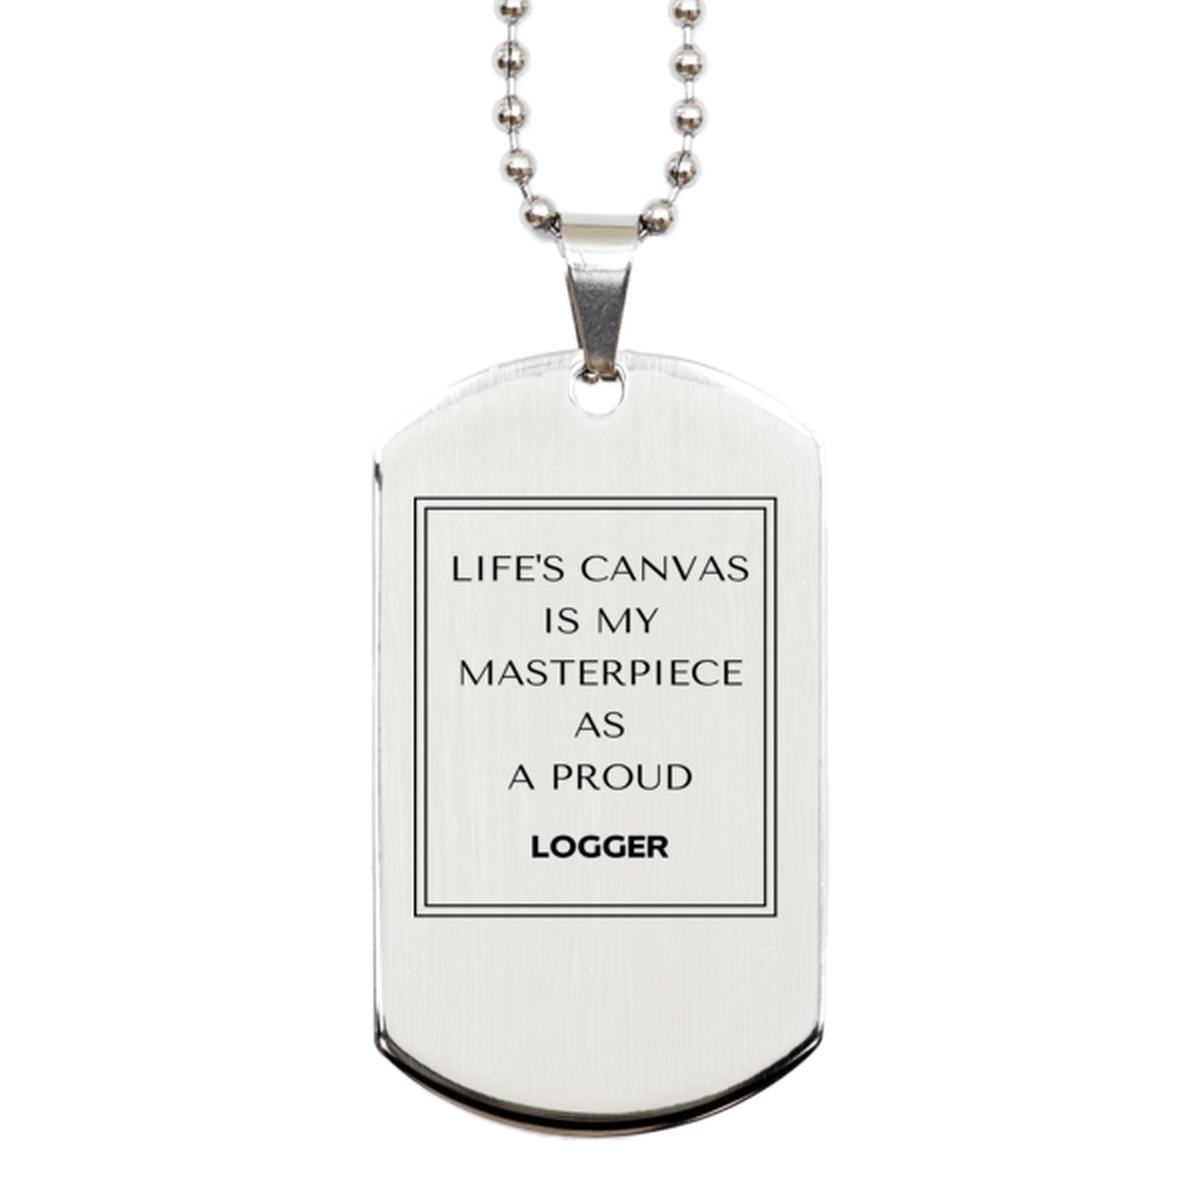 Proud Logger Gifts, Life's canvas is my masterpiece, Epic Birthday Christmas Unique Silver Dog Tag For Logger, Coworkers, Men, Women, Friends